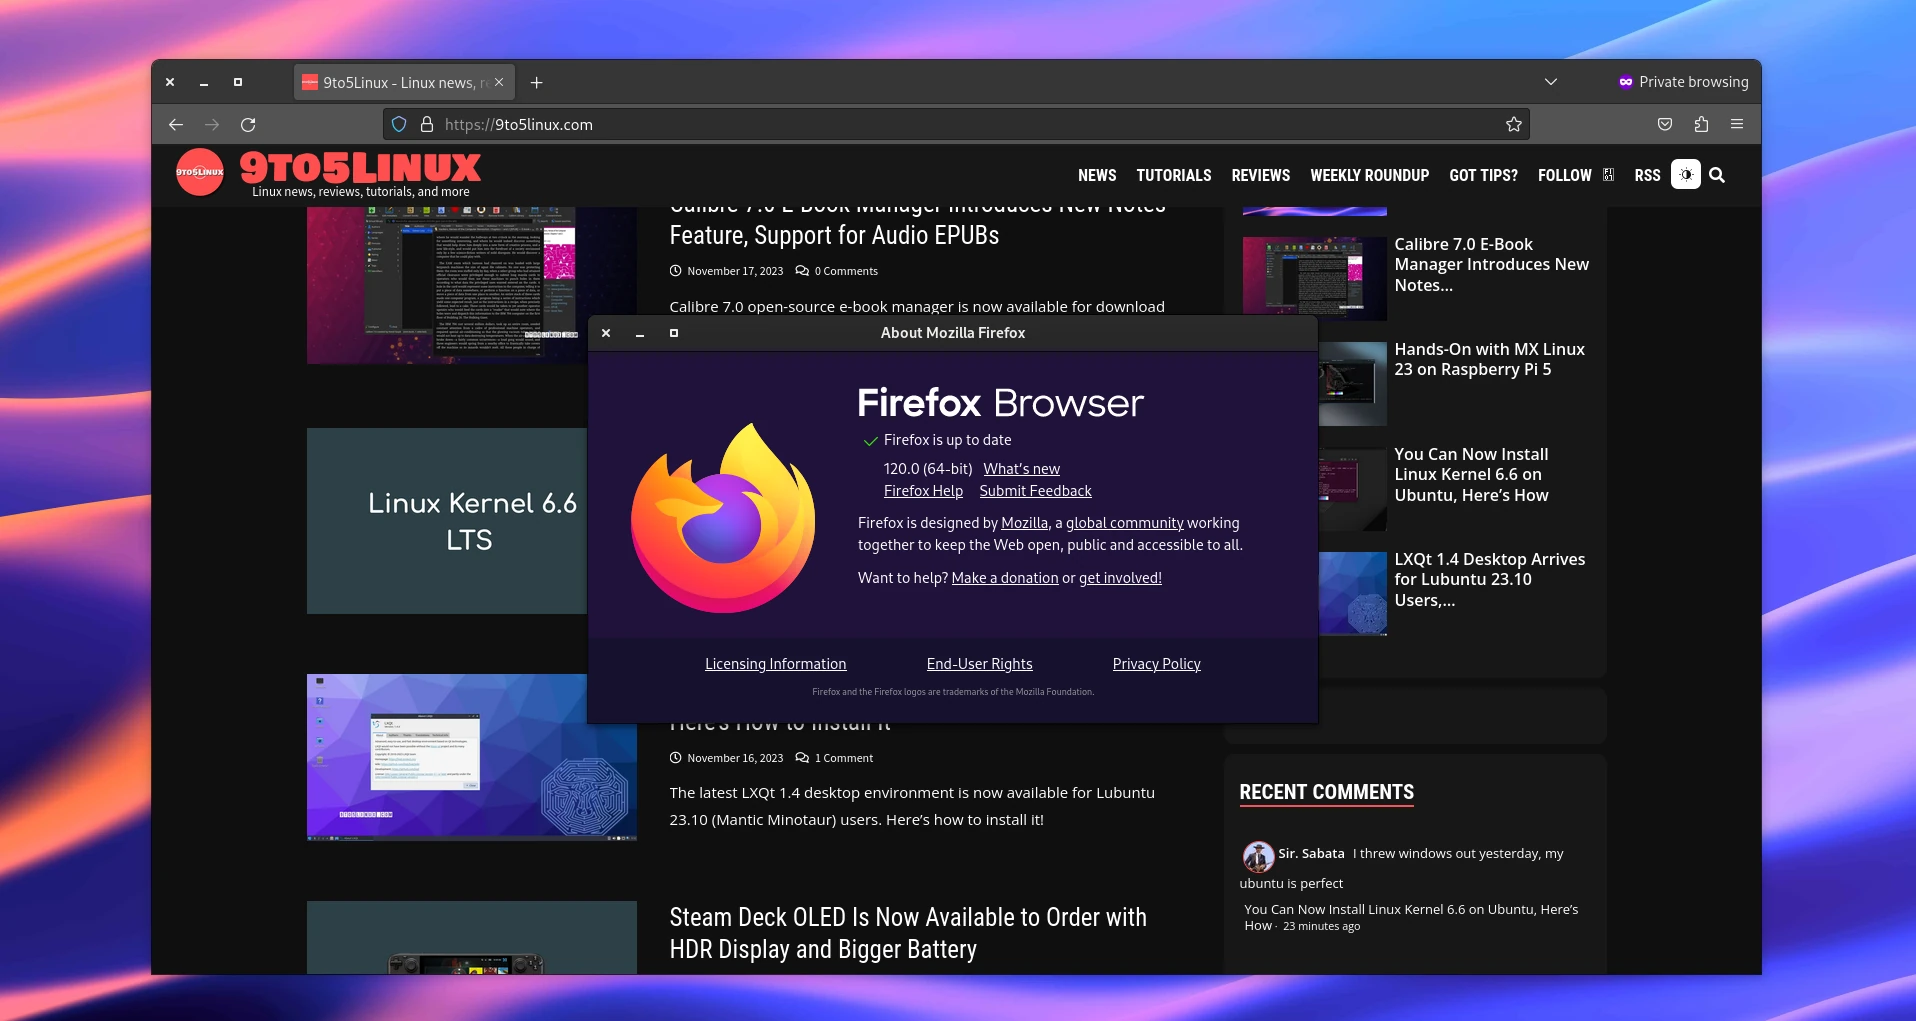 Mozilla Firefox 120 Is Now Available for Download, Here’s What’s New